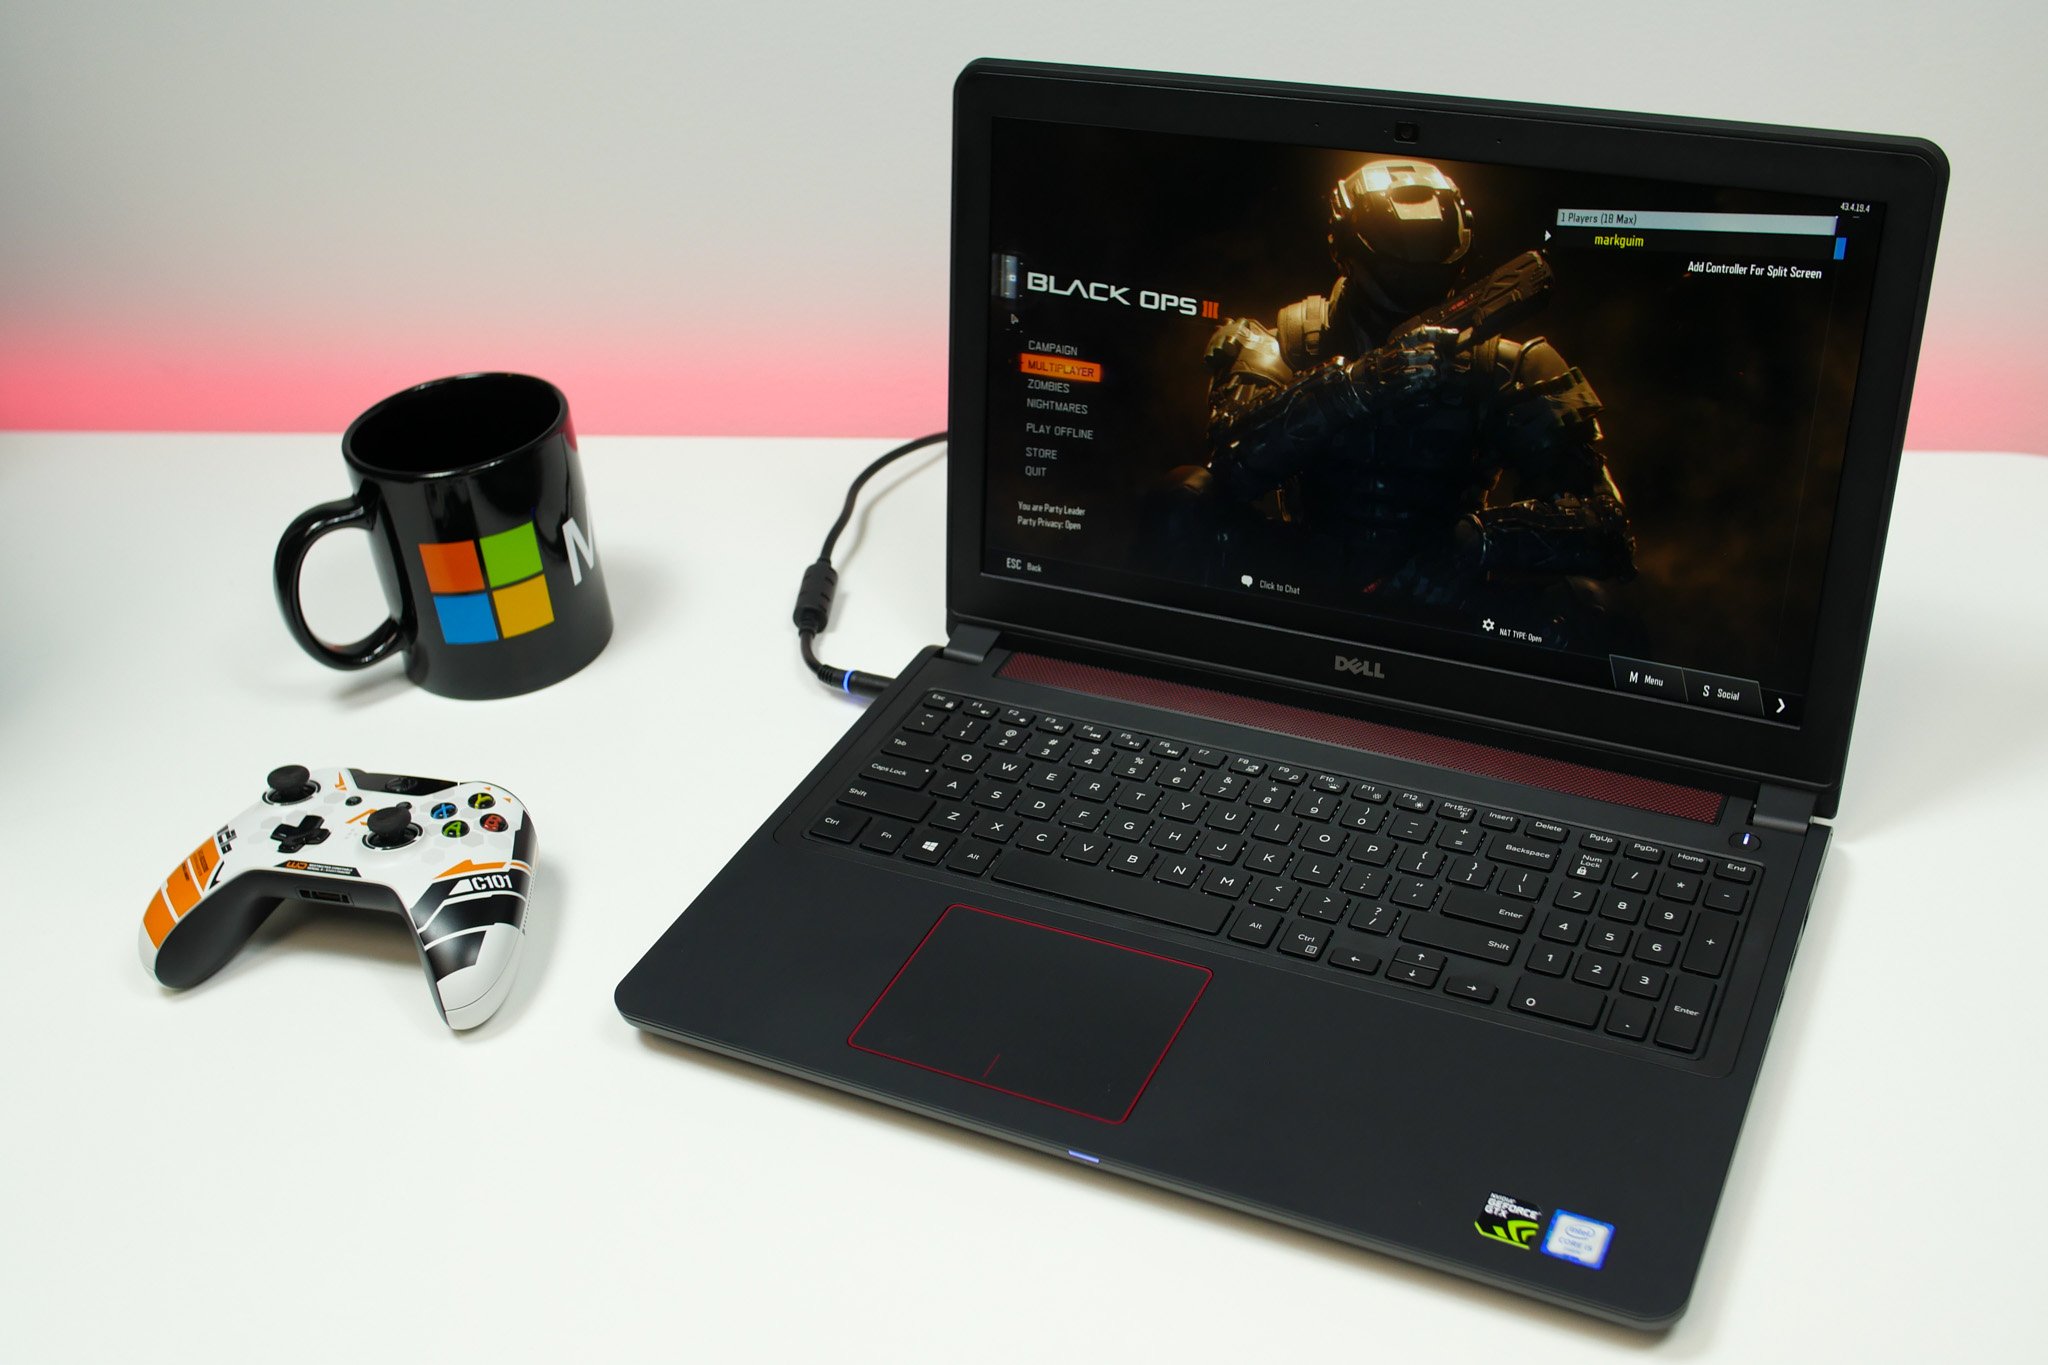 Dell Inspiron 15 7559 review: a solid gaming laptop for just $799